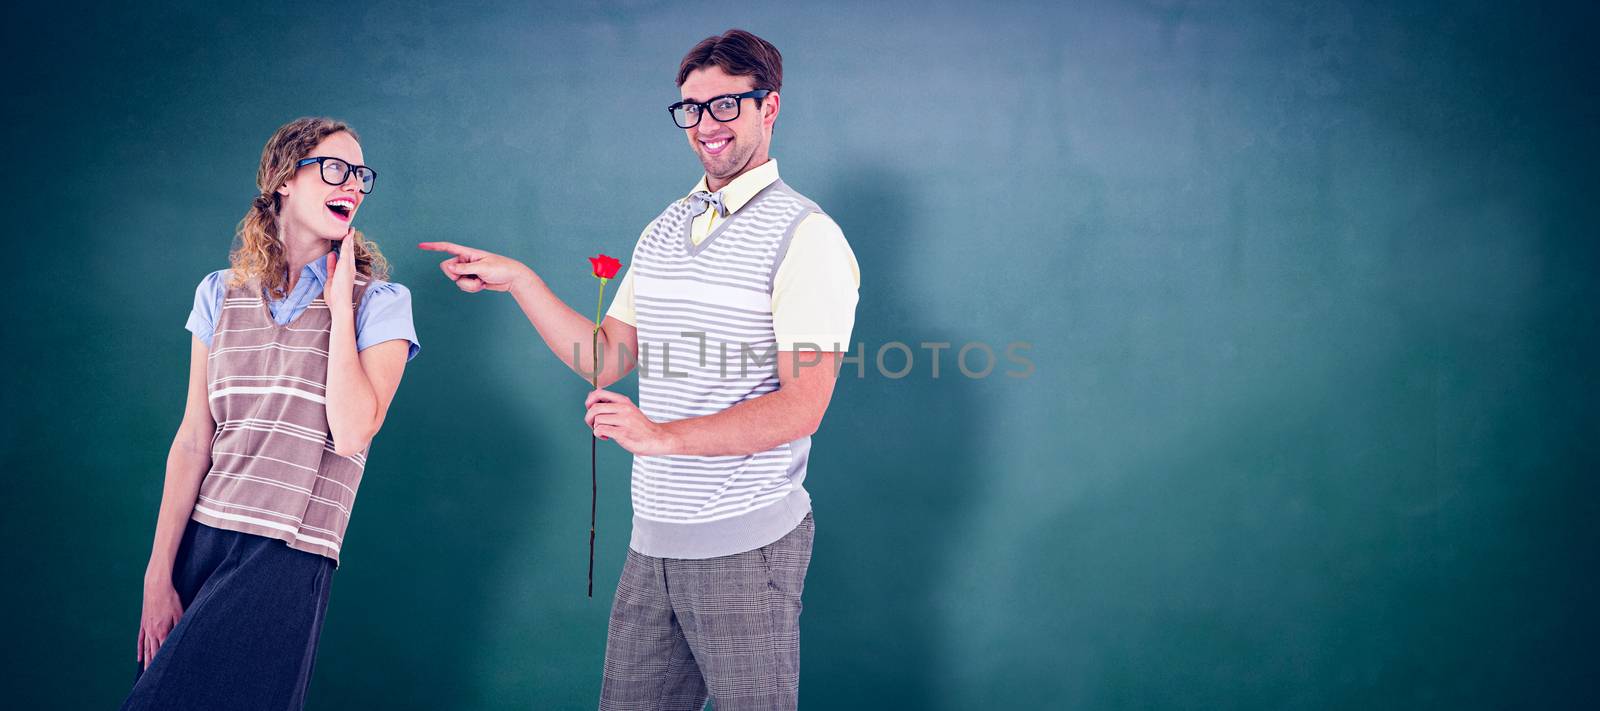 Geeky hipster holding rose and pointing his girlfriend  against green chalkboard